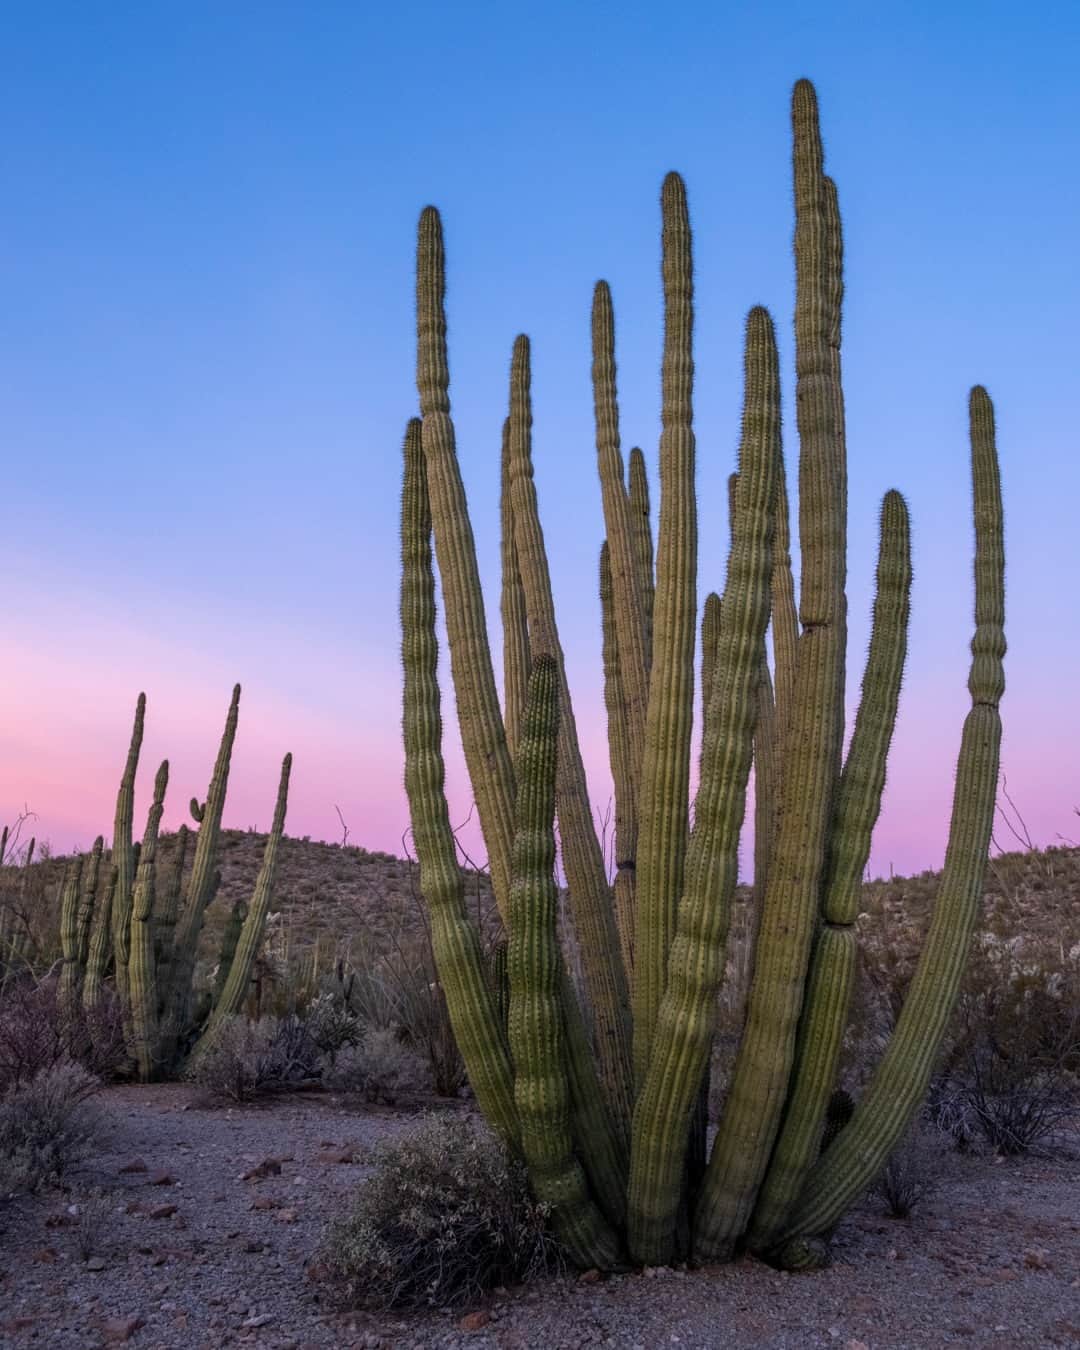 National Geographic Travelのインスタグラム：「Photo by @kristarossow | While visiting southern Arizona, I ventured out at dawn to photograph the giant organ pipe cacti that grow abundantly in this section of the Sonoran Desert. The branching arms of these cacti can reach up to 23 feet (7 meters) high.   Follow @kristarossow for more images from around the world.」